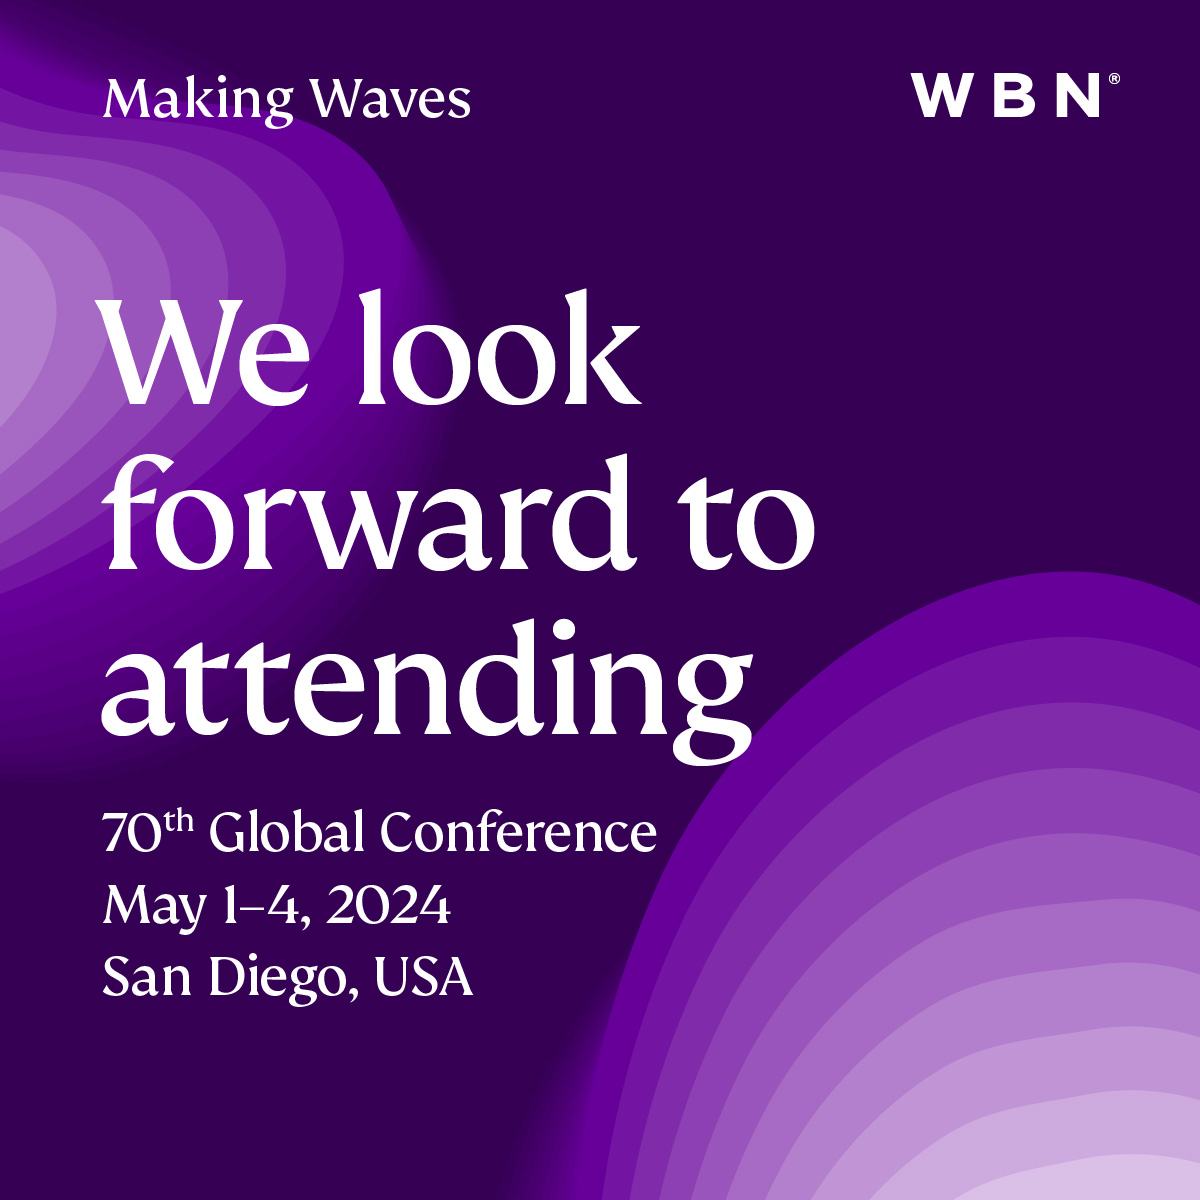 WBN’s 70th Global Conference in San Diego is less than a month away! If you’re heading out too, feel free to reach out to the team and set up a meeting during conference week. Click the link below to see who's attending: ➡bit.ly/4axMETG #WBNSanDiego #WBN #MakingWaves